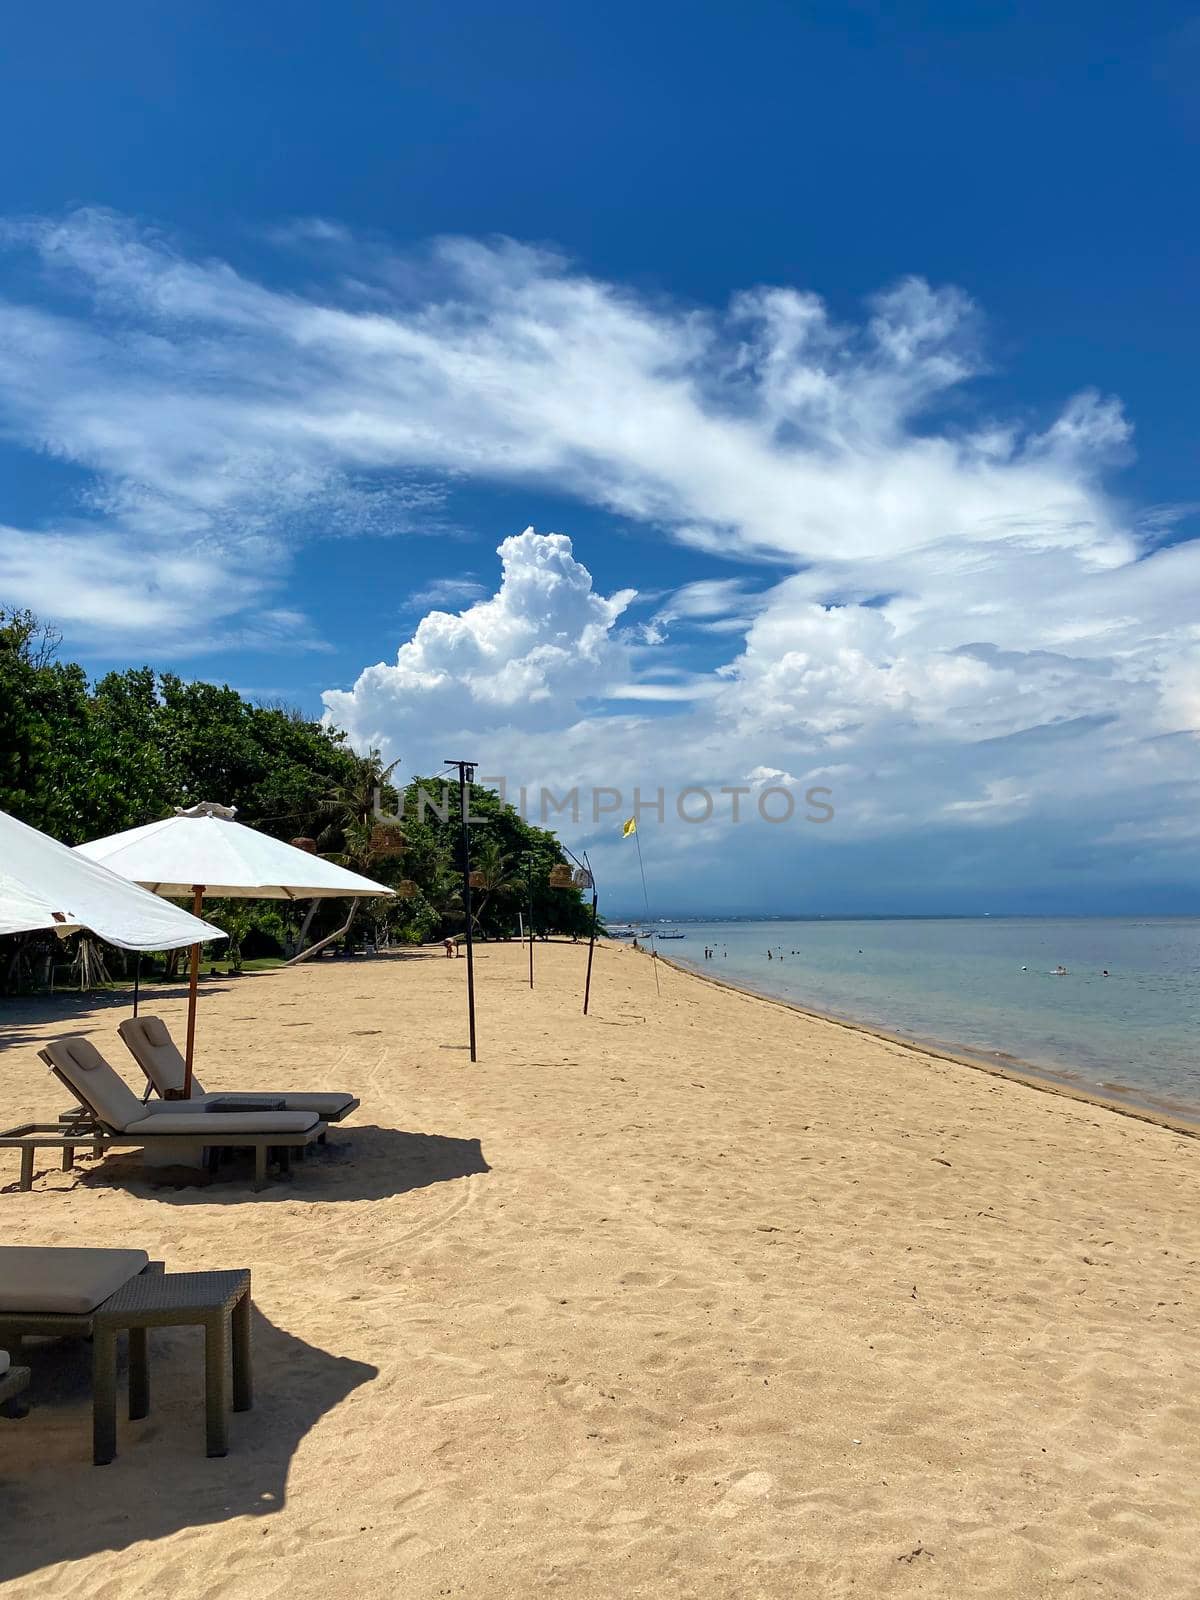 Stunning beautiful beach with relaxing scenery on a beach. Famous travel destination in Sanur, Bali, Indonesia. - stock photo. High quality photo